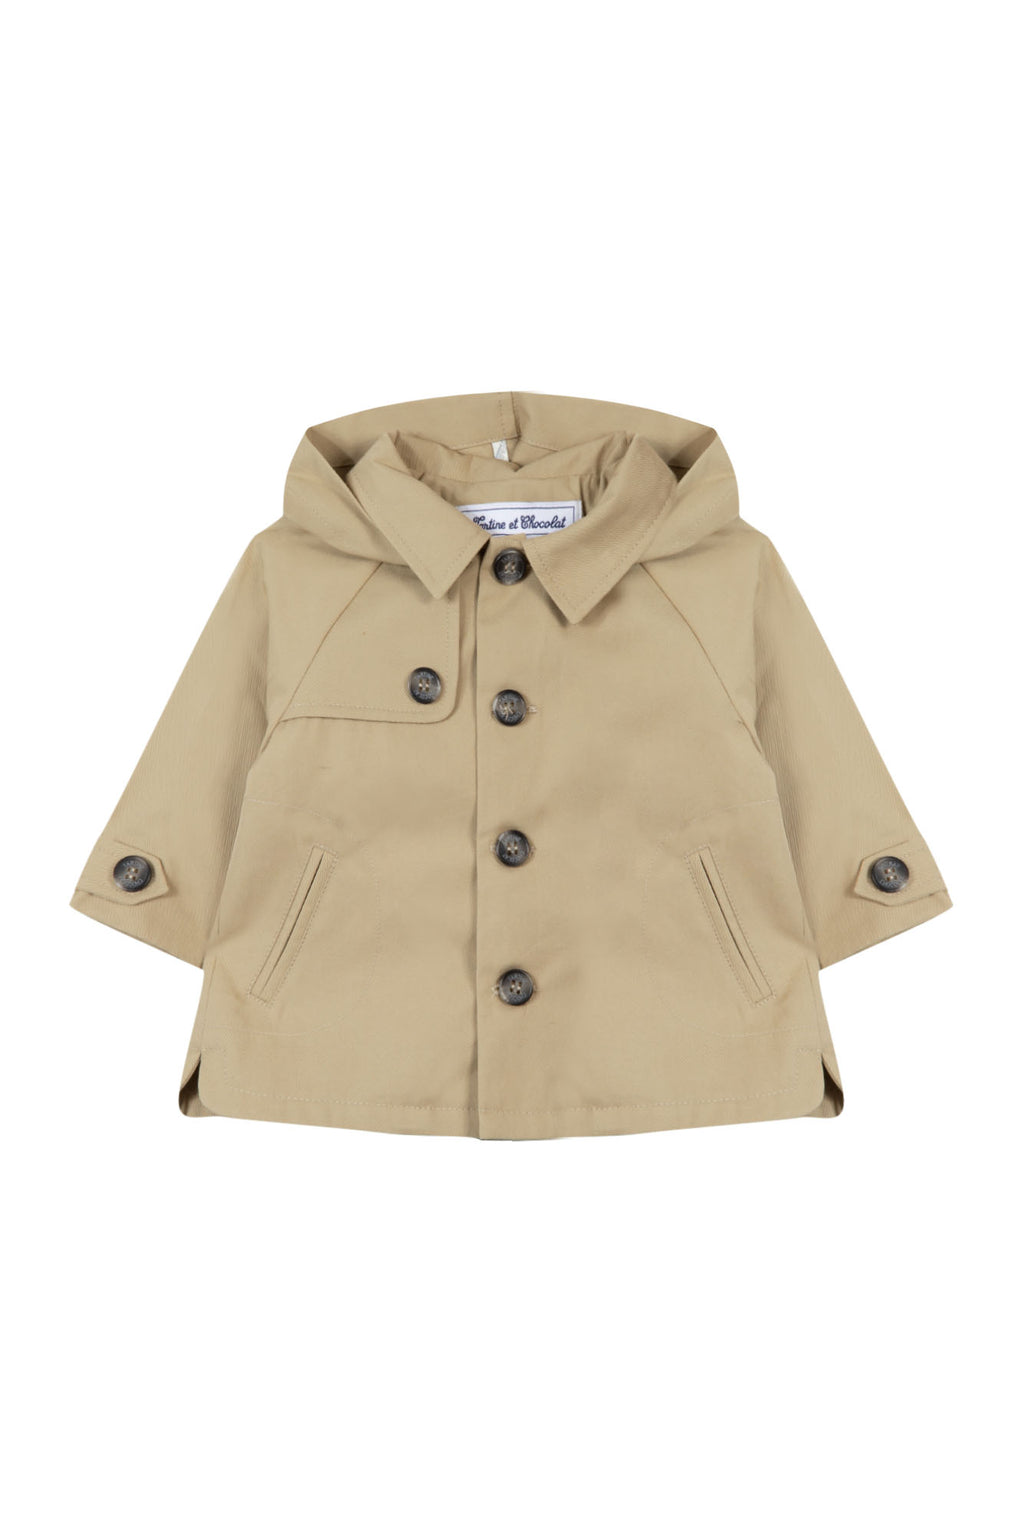 Cotton sand trench coat